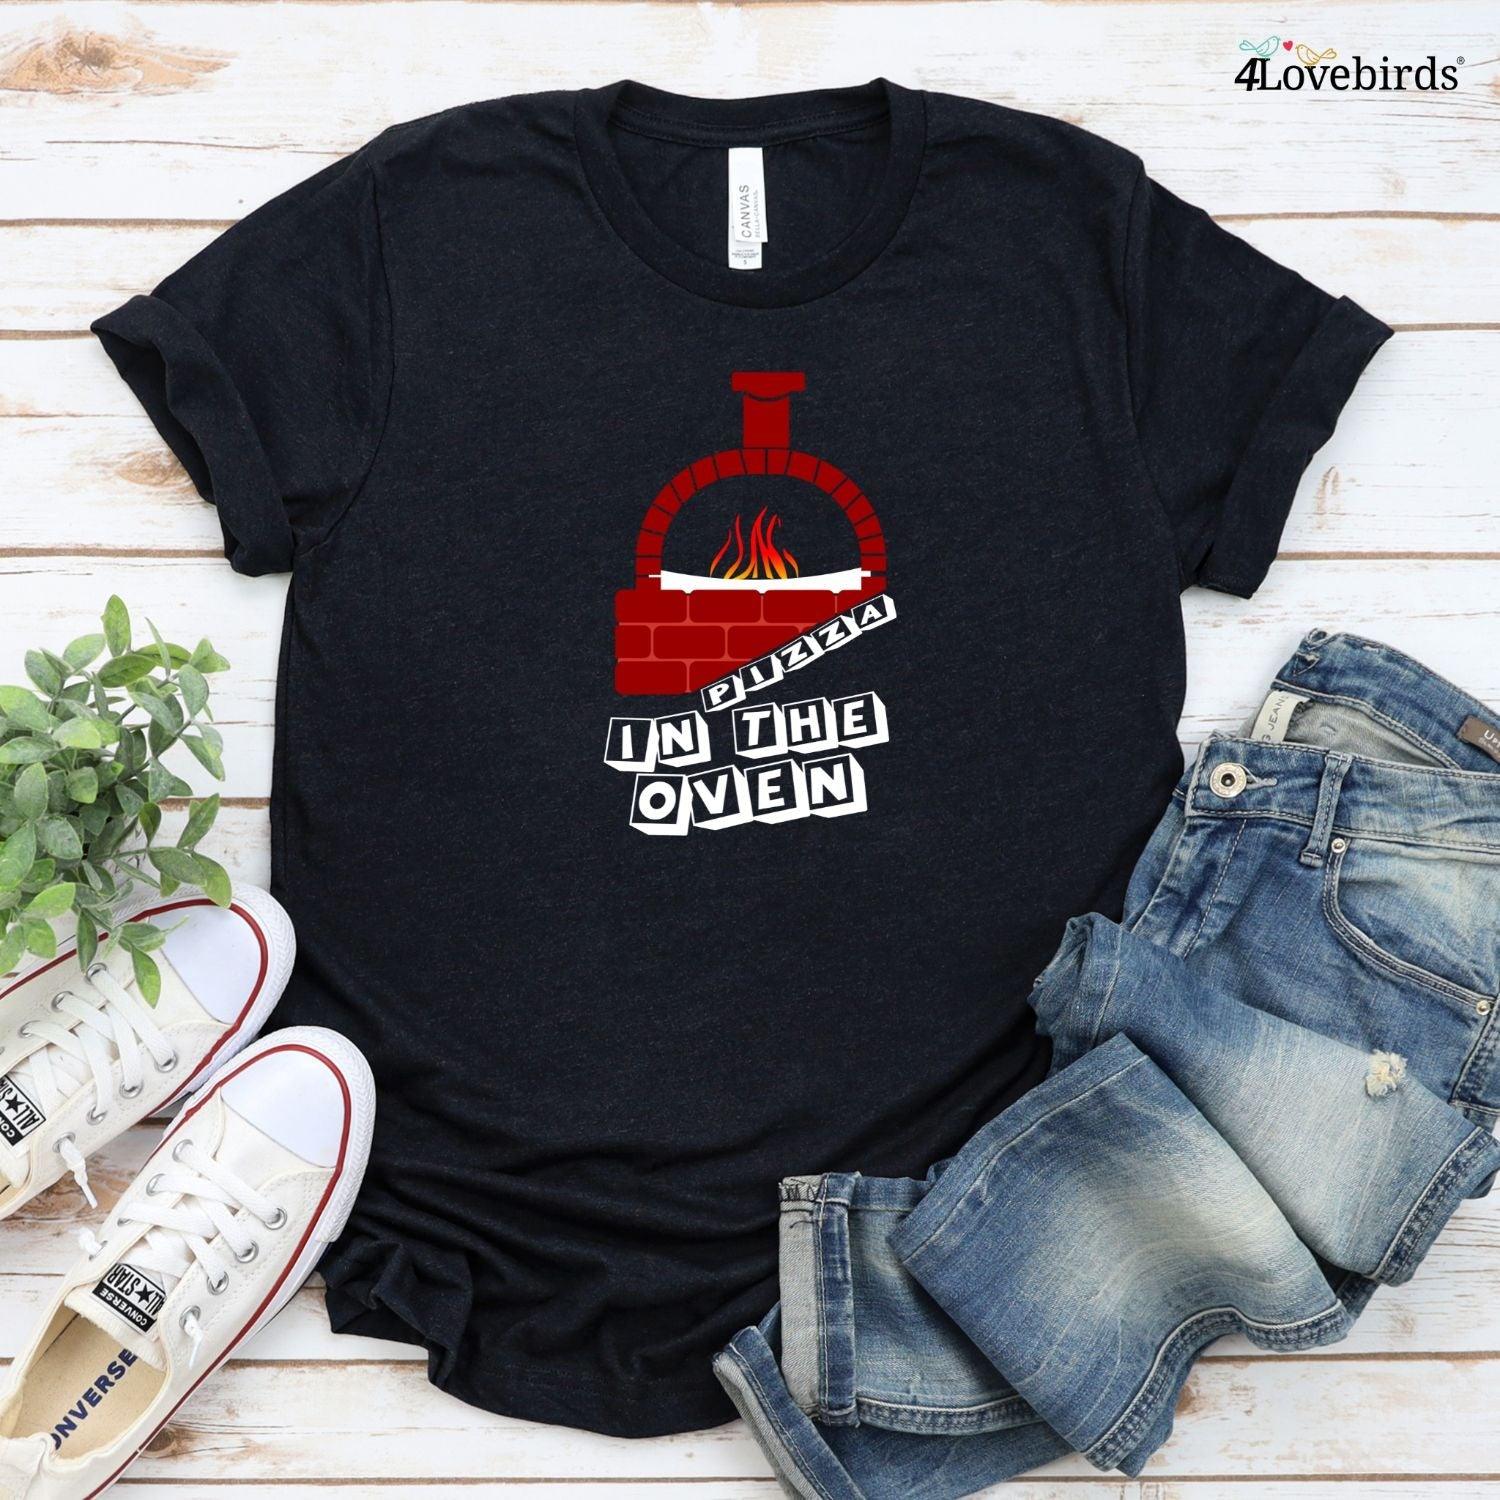 Matching Sets for Pizzeria-Loving Couples & Pregnant Announcements: Tops & Hoodies! - 4Lovebirds